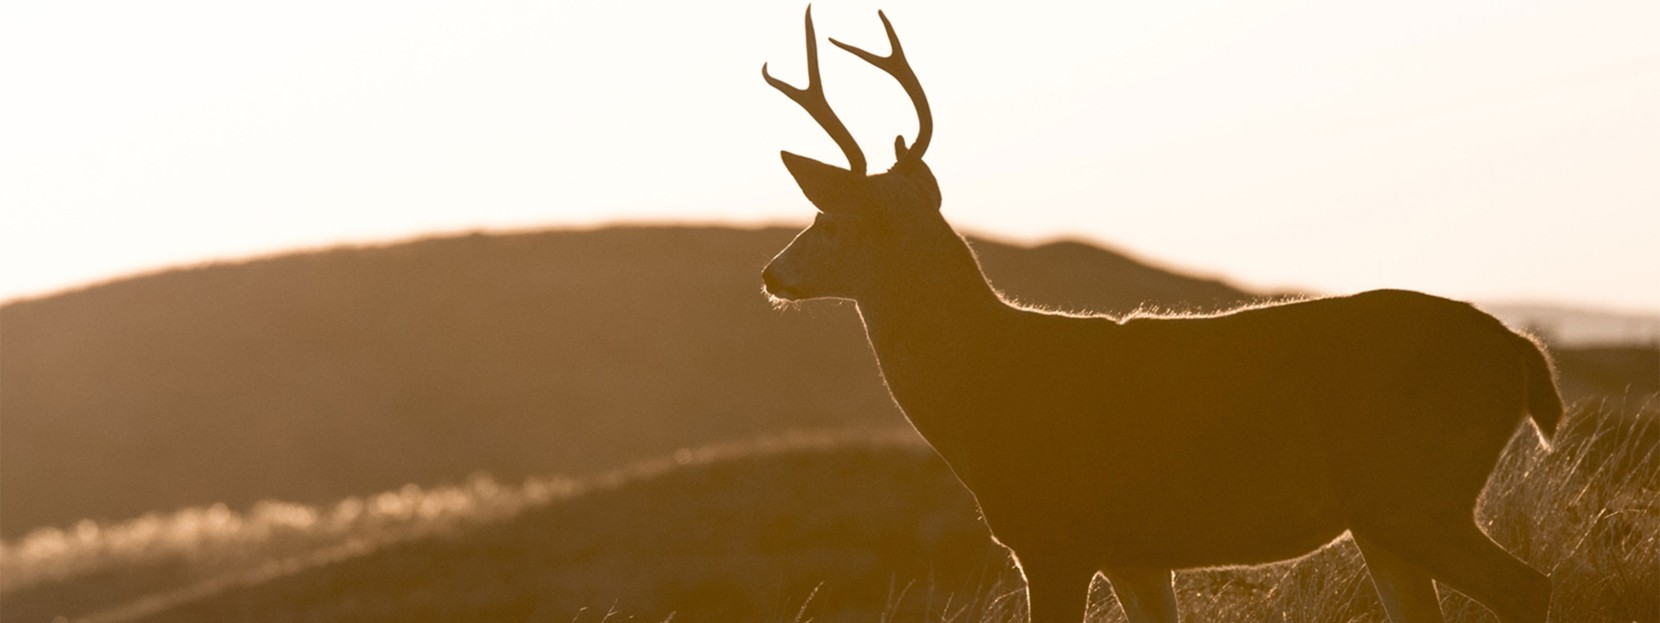 A young buck silhoueted against a field and cloudy sky.